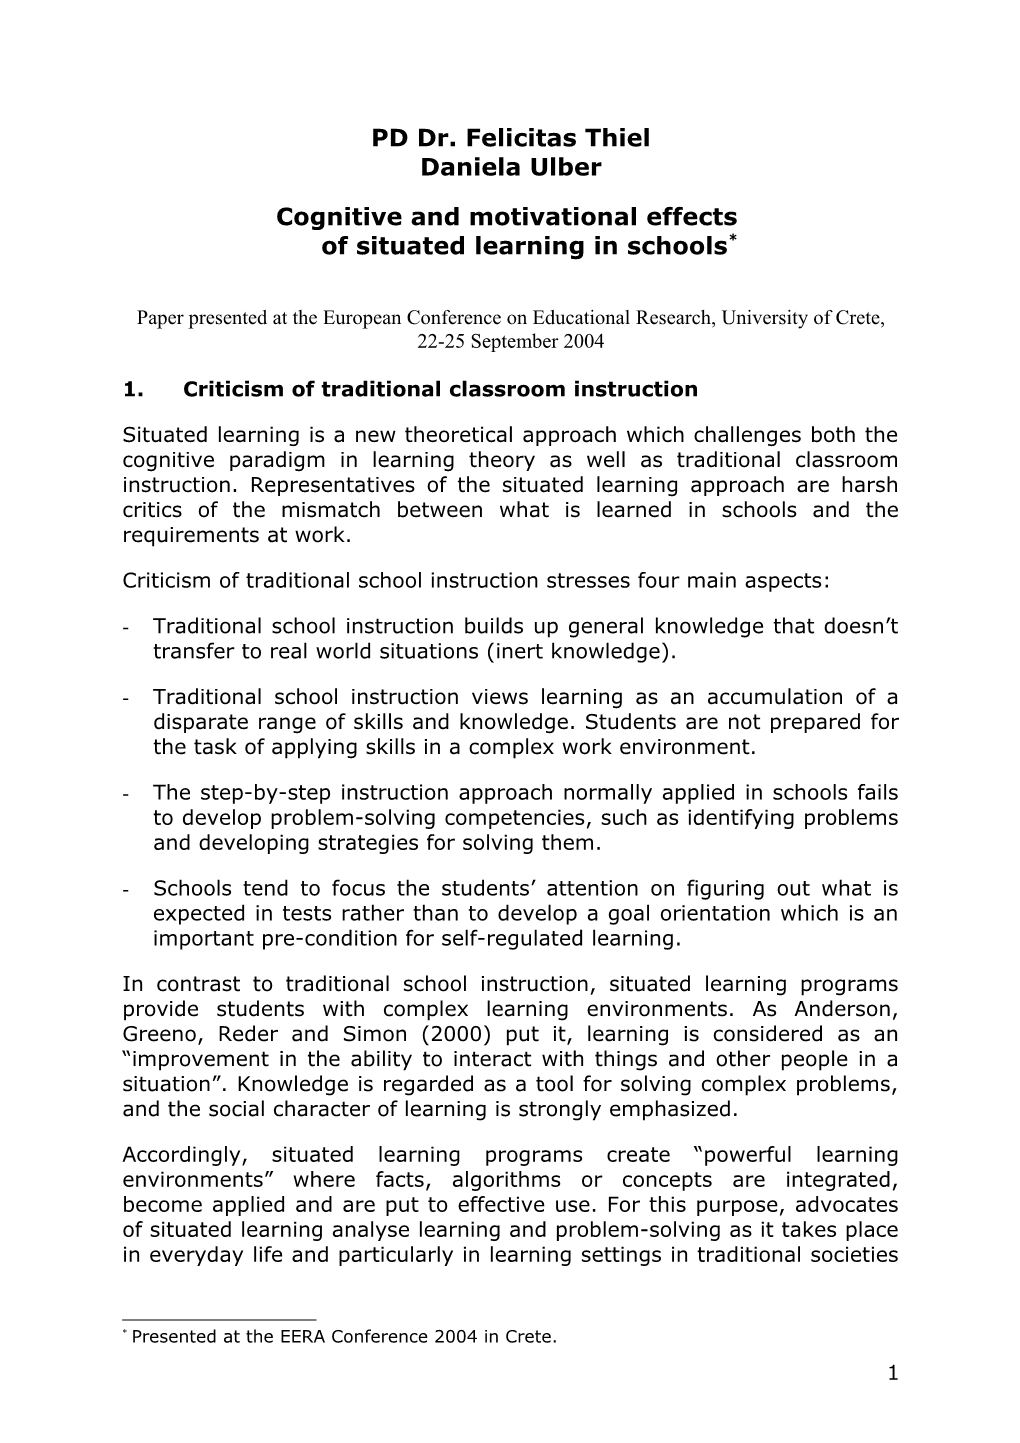 Cognitive and Motivational Effects of Situated Learning in Schools *